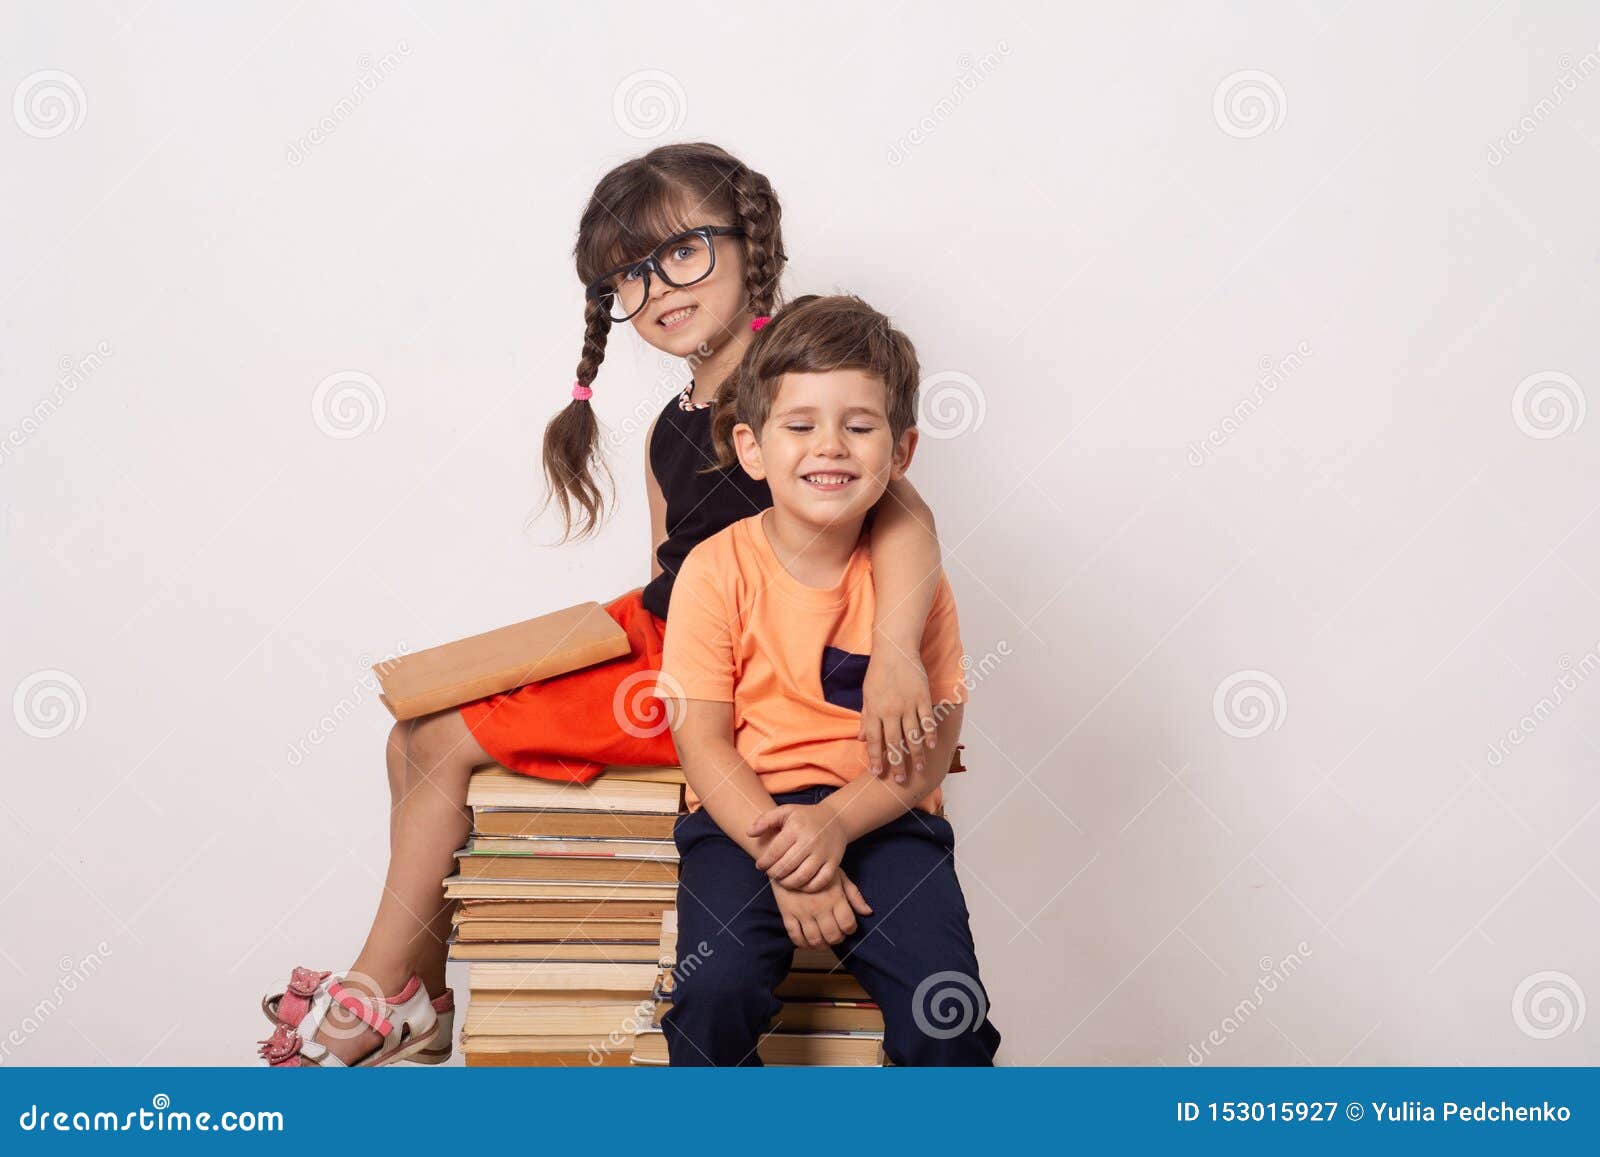 industrious child boy and girl with books. back to school creative background with school children.